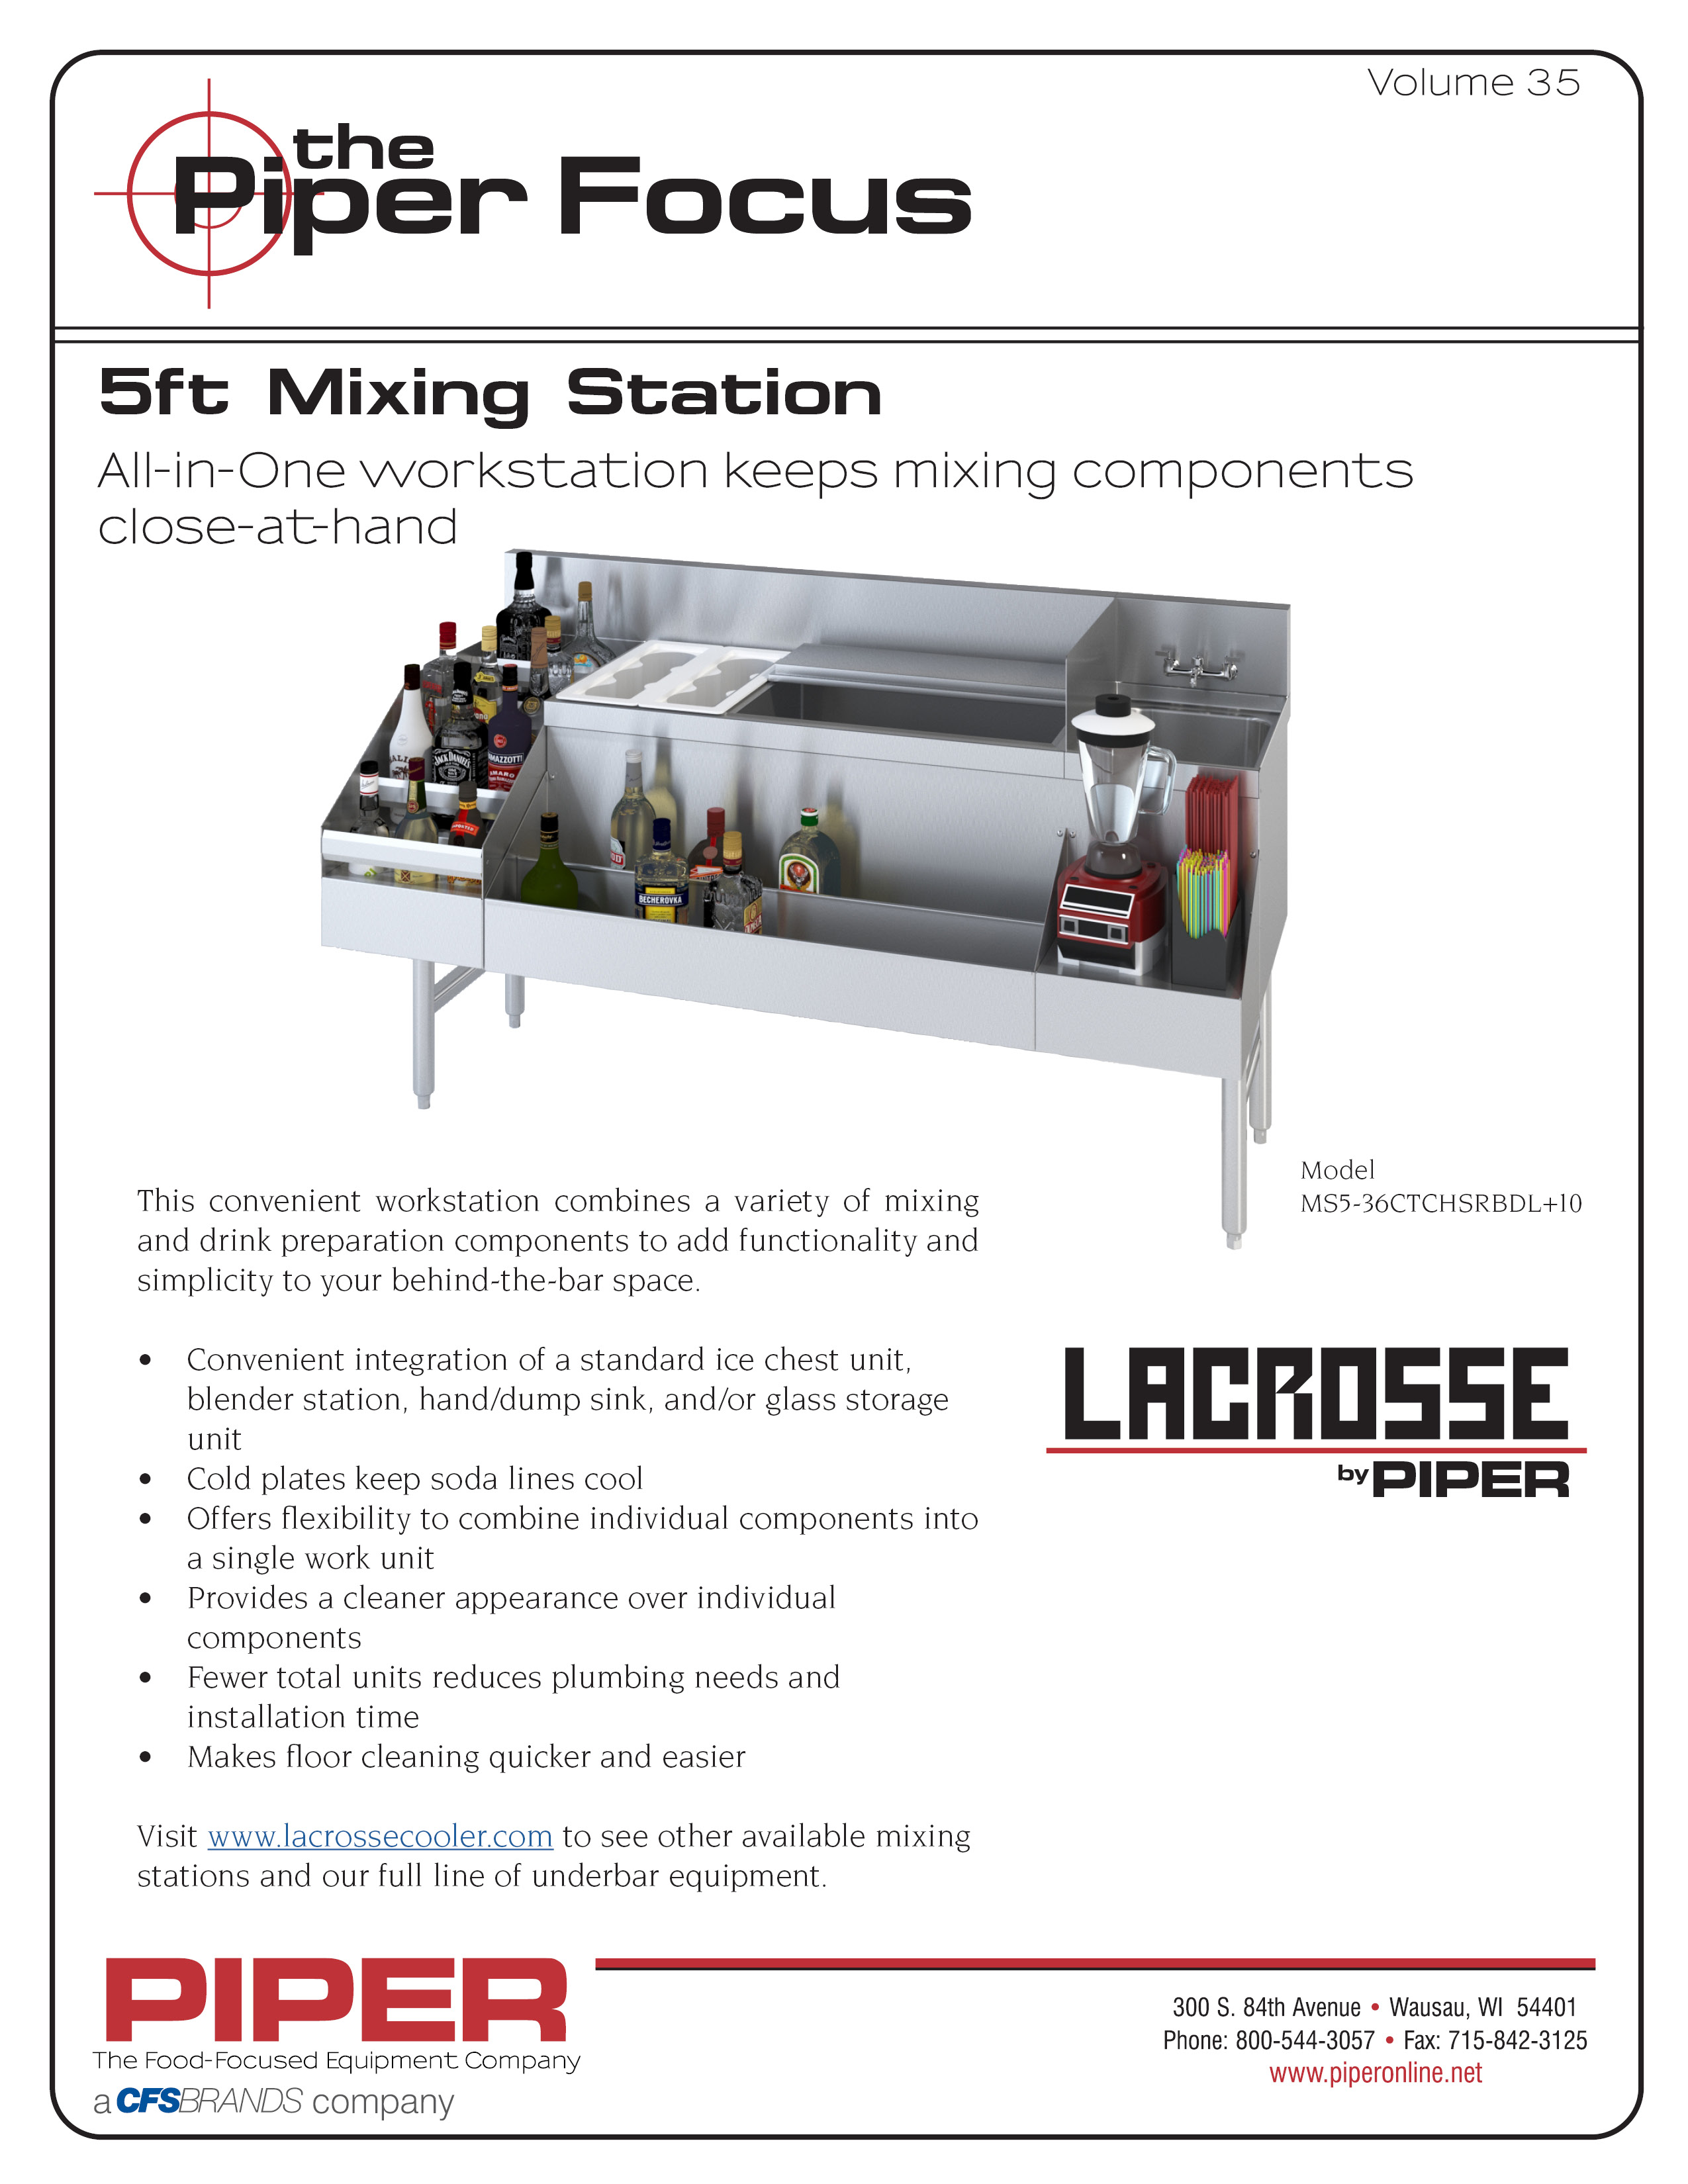 Piper Focus Mixing Stations